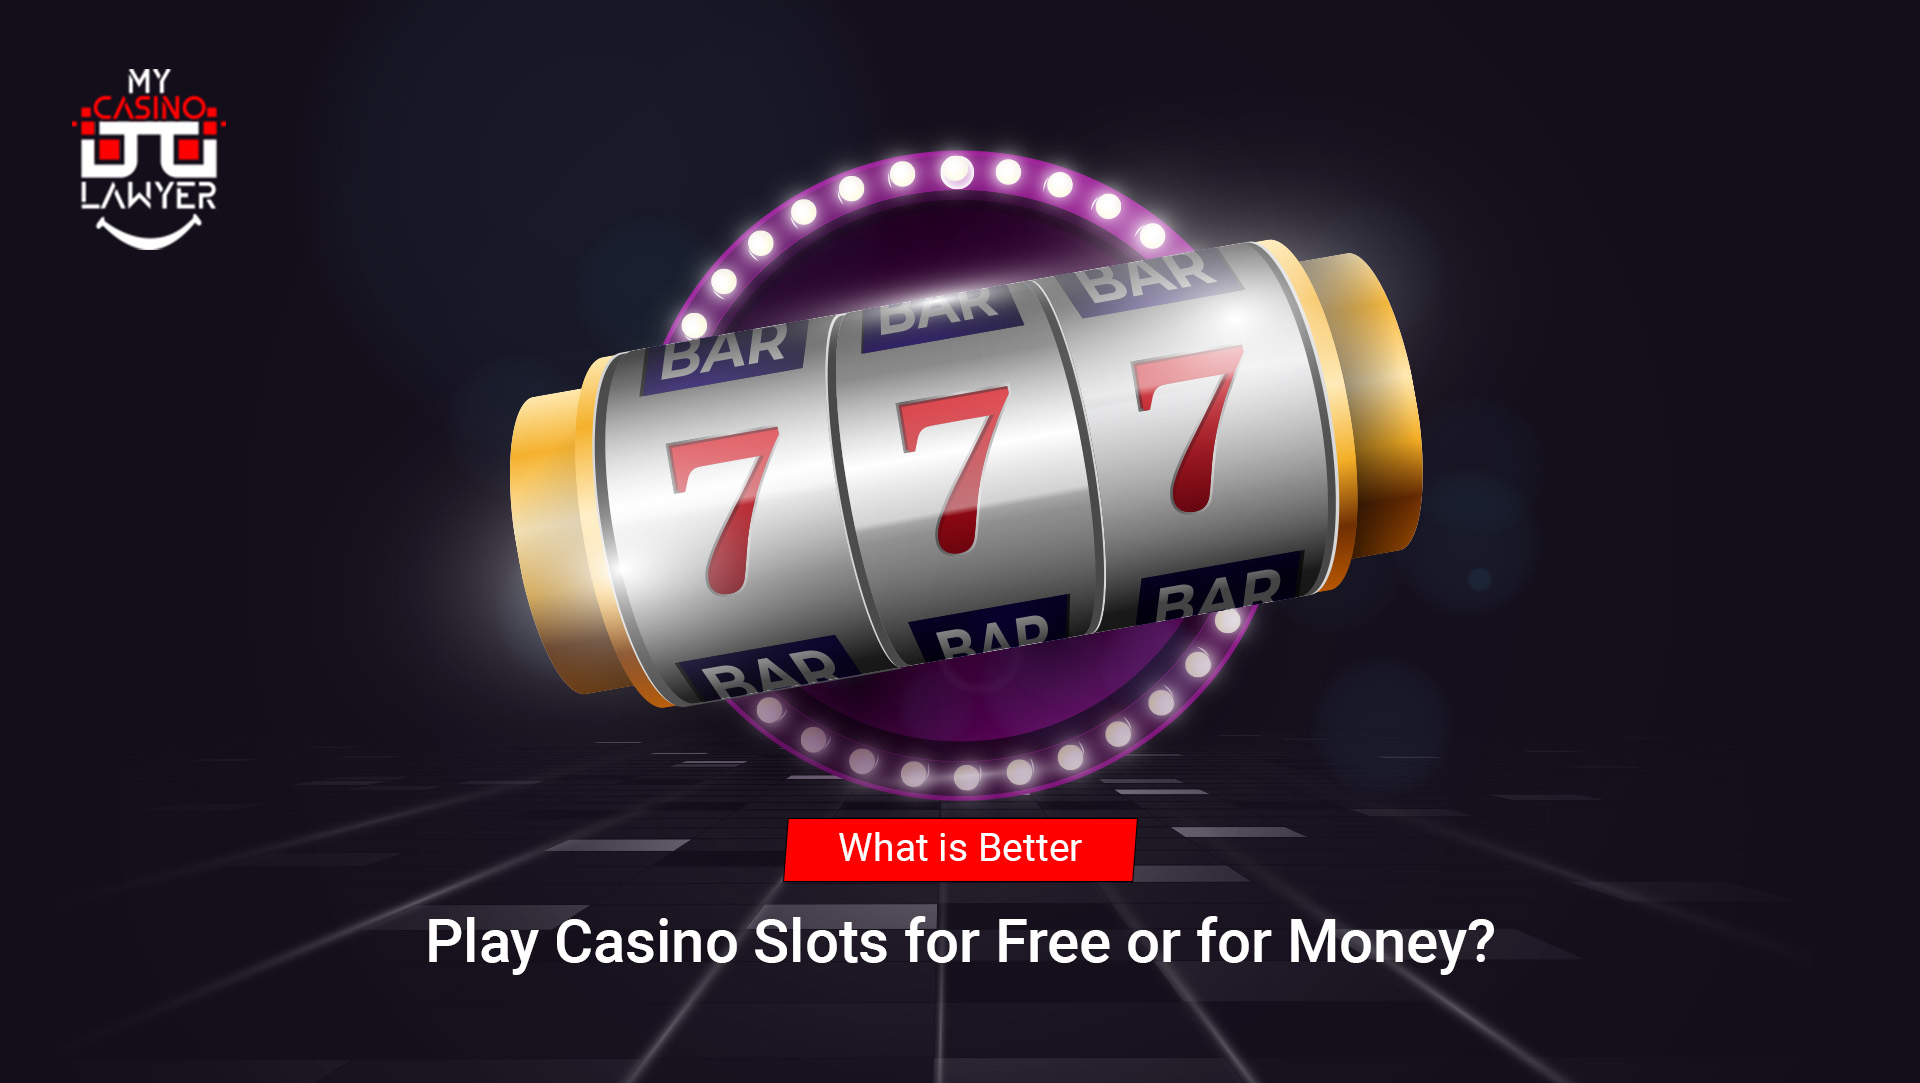 What is Better- Play Casino Slots for Free or for Money?